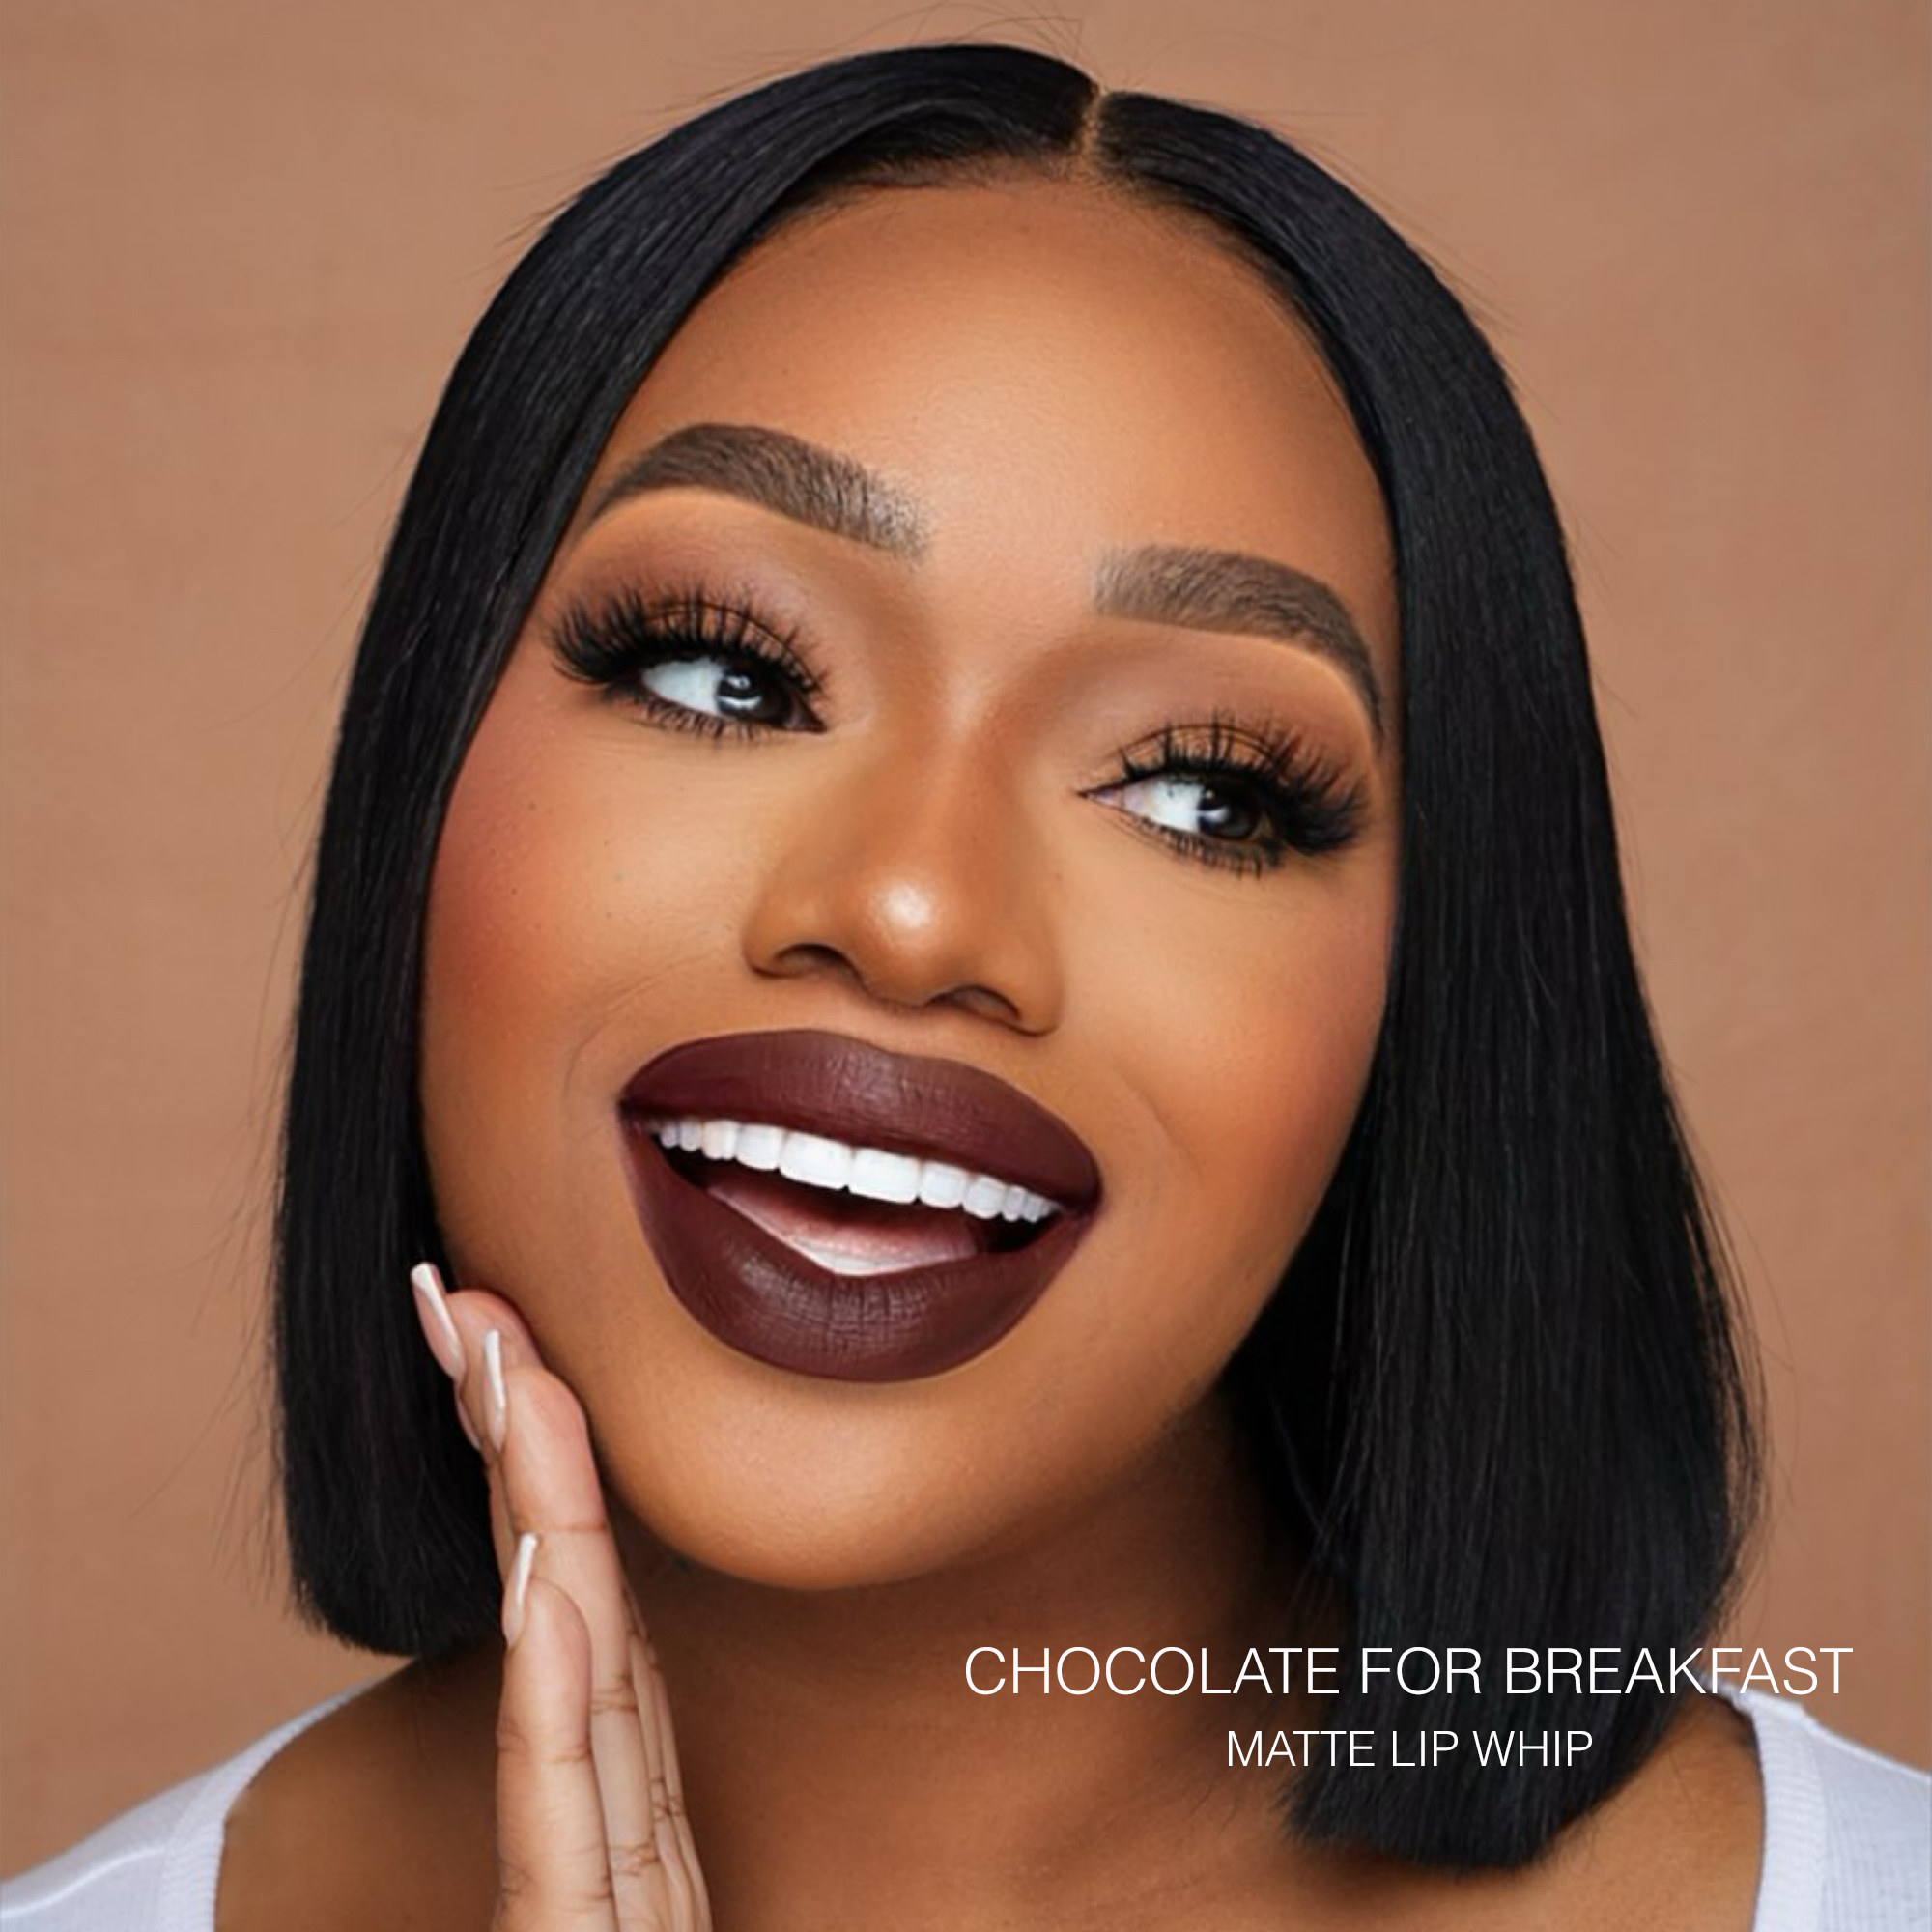 Chocolate for Breakfast Matte Lip Whip